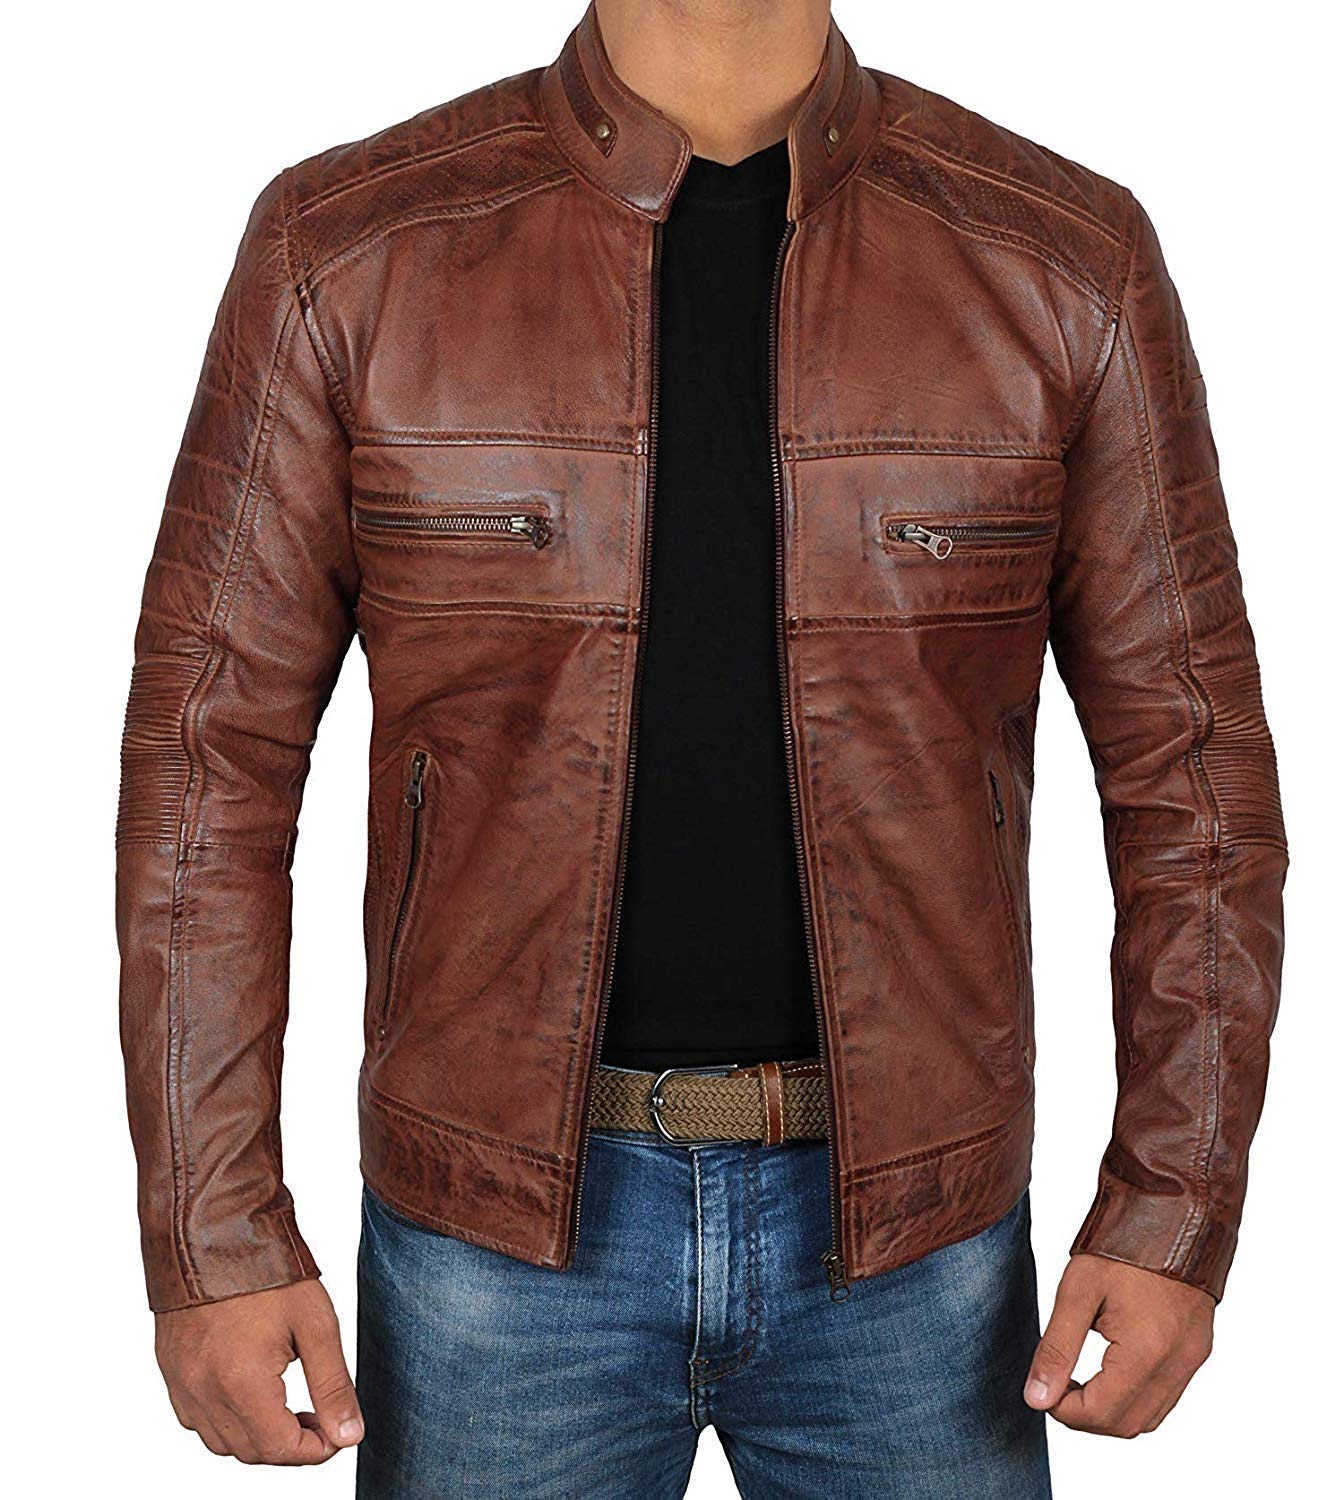 Decrum Brown Leather Jacket Mens - Cafe Racer Real Lambskin Leather Distressed Motorcycle Jacket